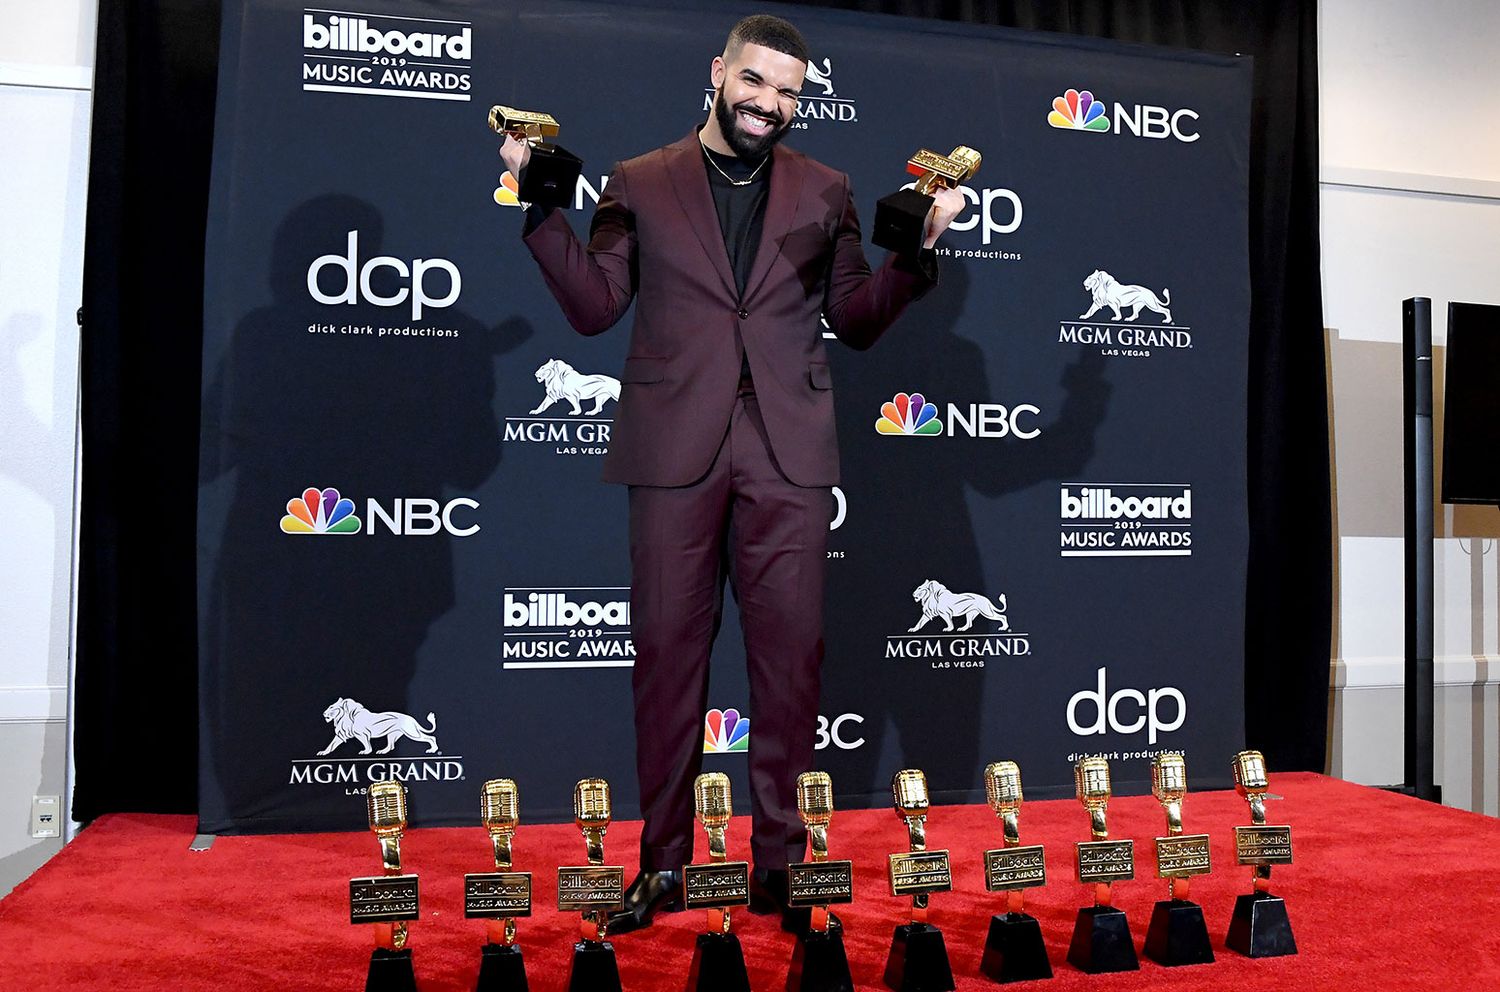 What Did Drake Perform At The Billboard Music Awards